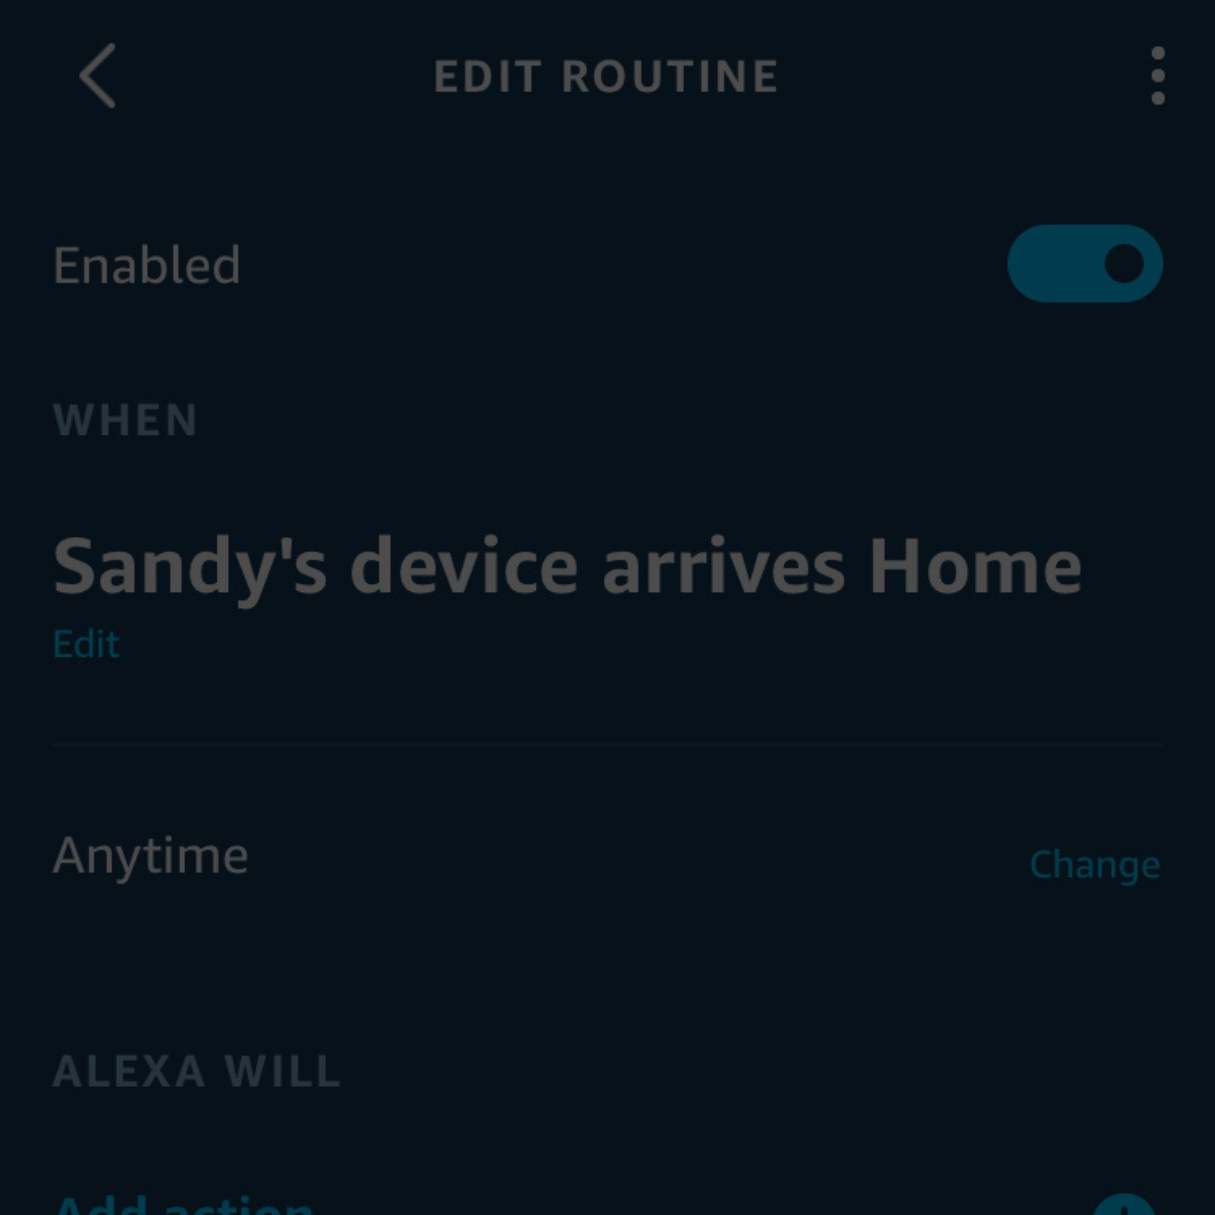 How To Cancel A Routine On Alexa